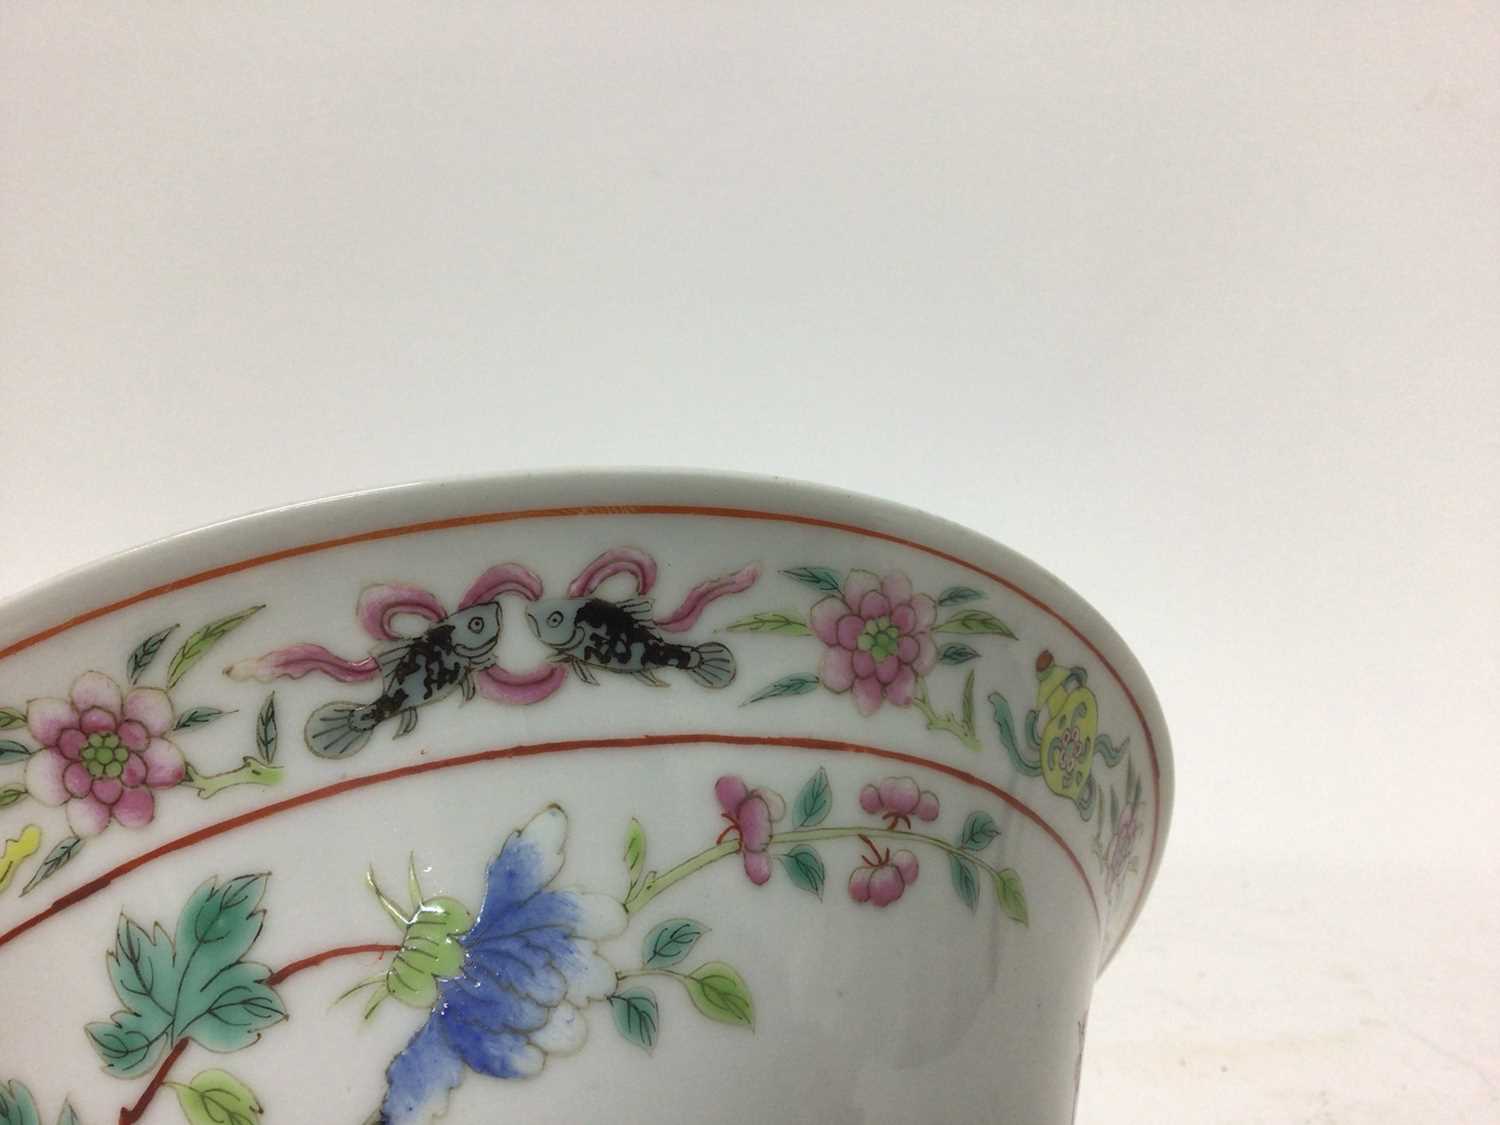 Pair of Chinese famille rose porcelain bowls, c.1900, decorated with tropical birds, flowers and aus - Image 8 of 9